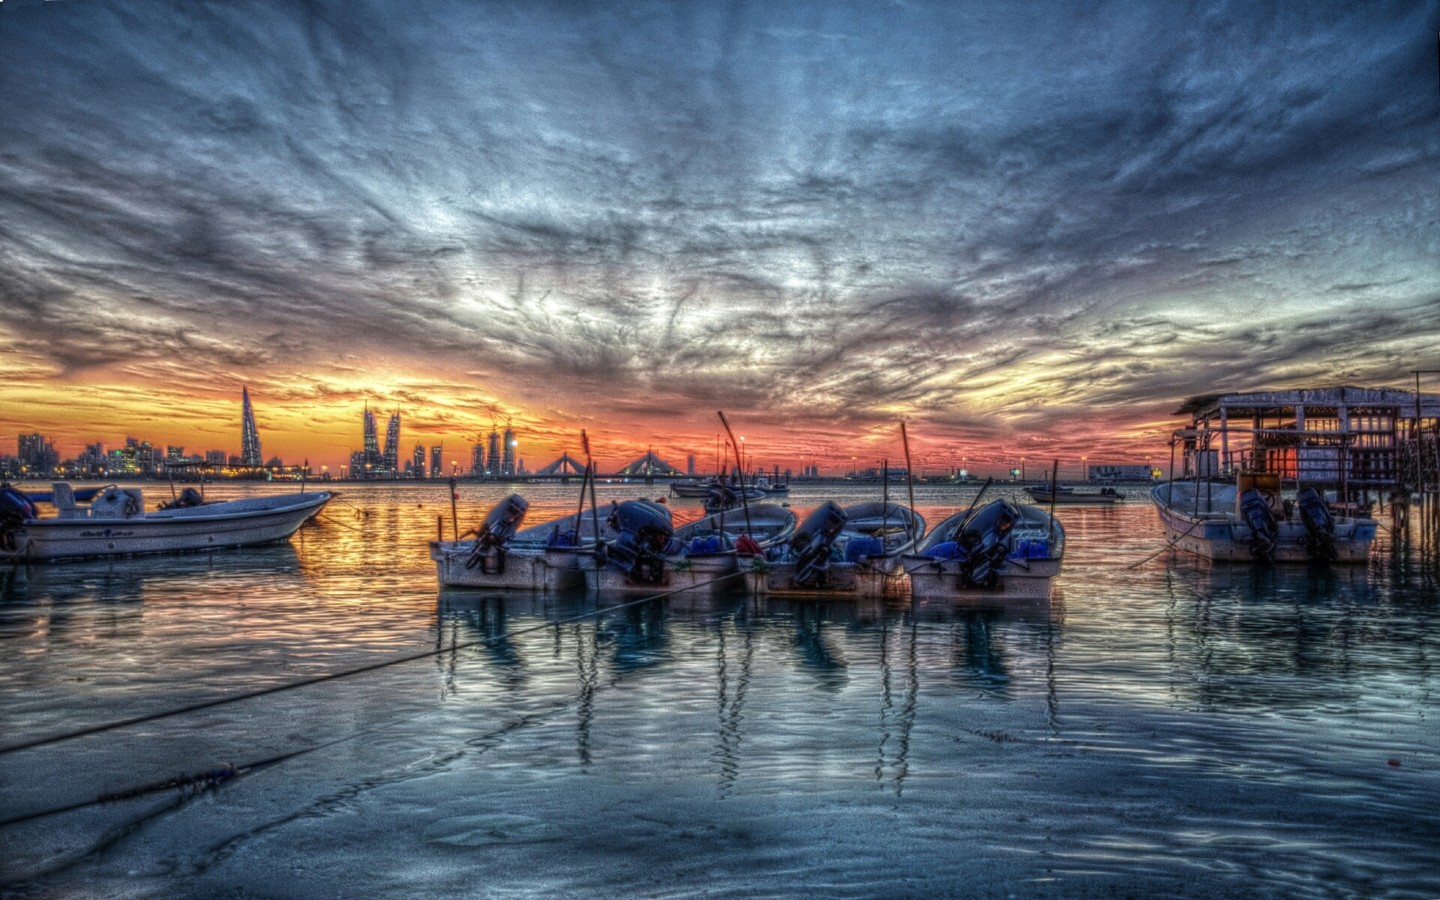 hdr photography